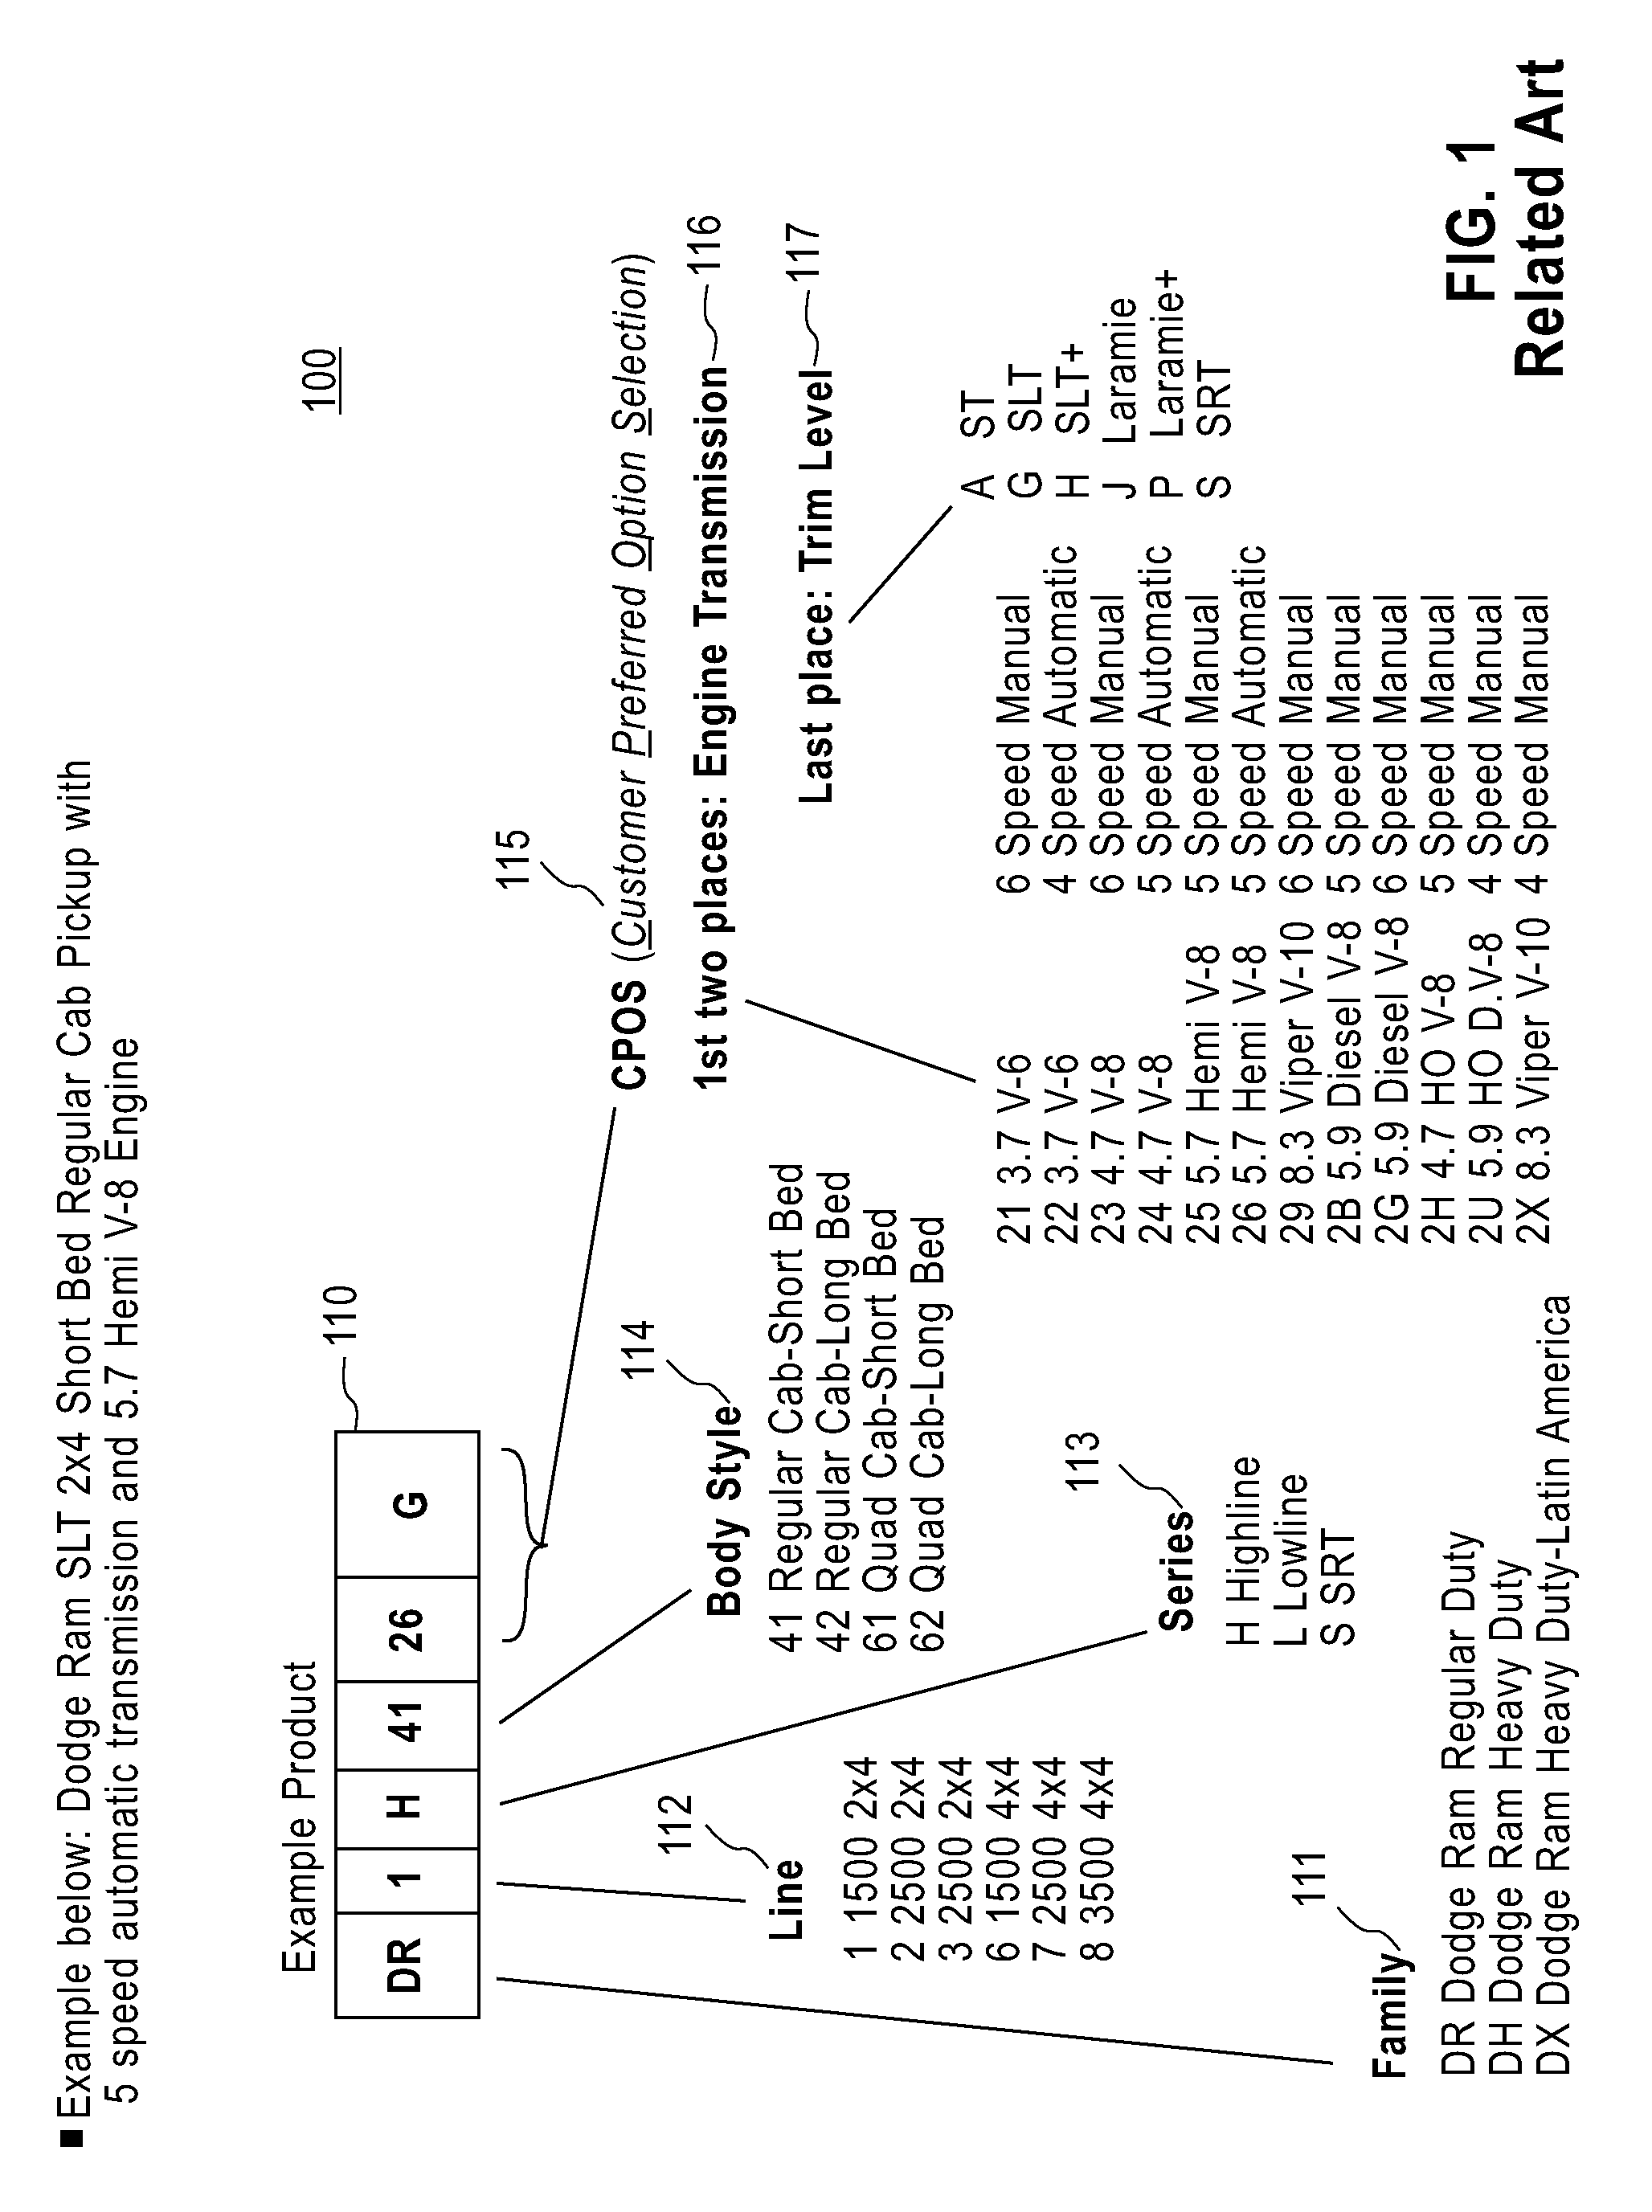 Method and structure for risk-based resource planning for configurable products